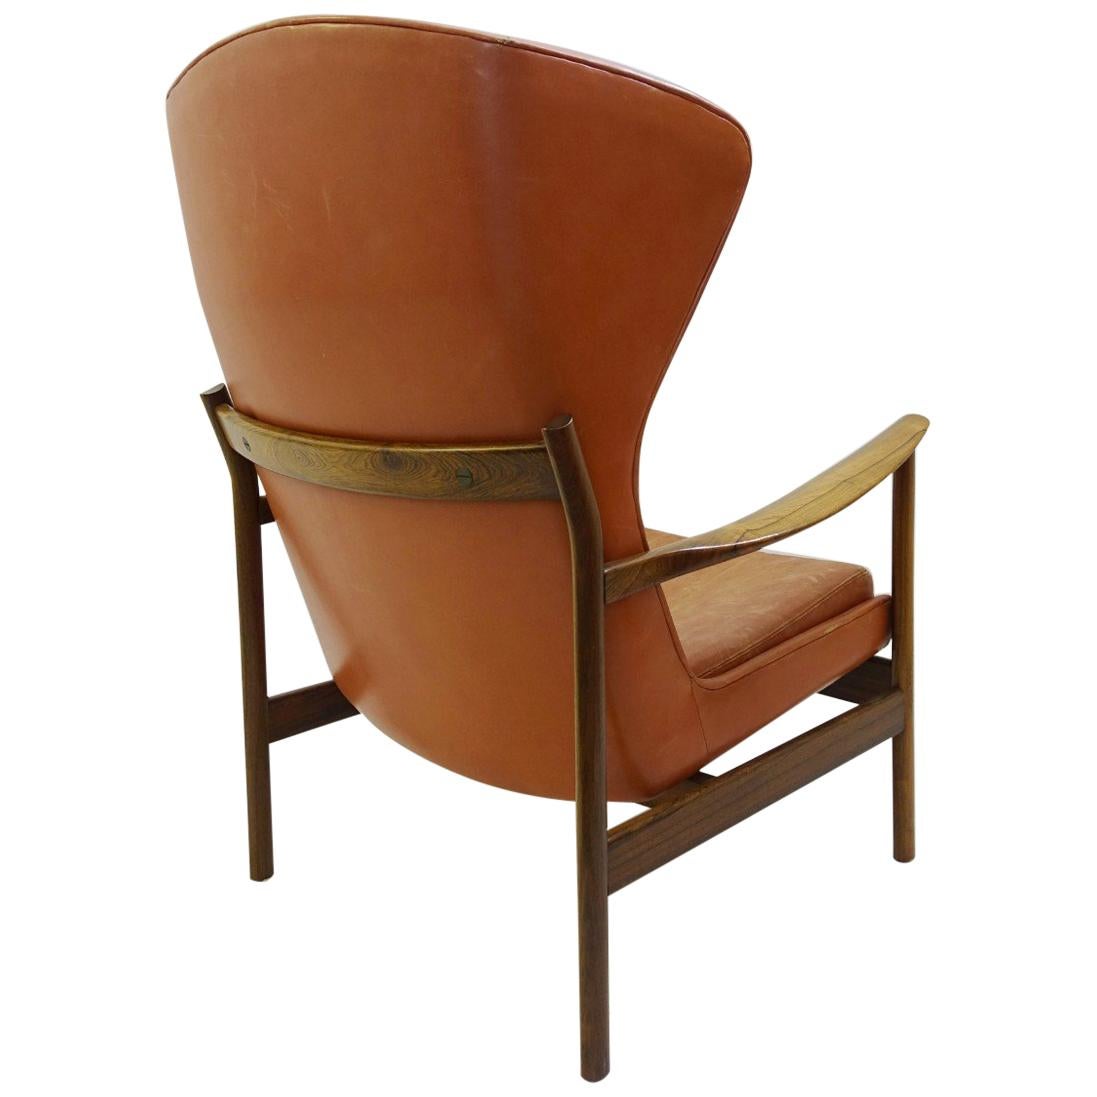 High Back Armchair in Wood and Leather, Padding to Replace